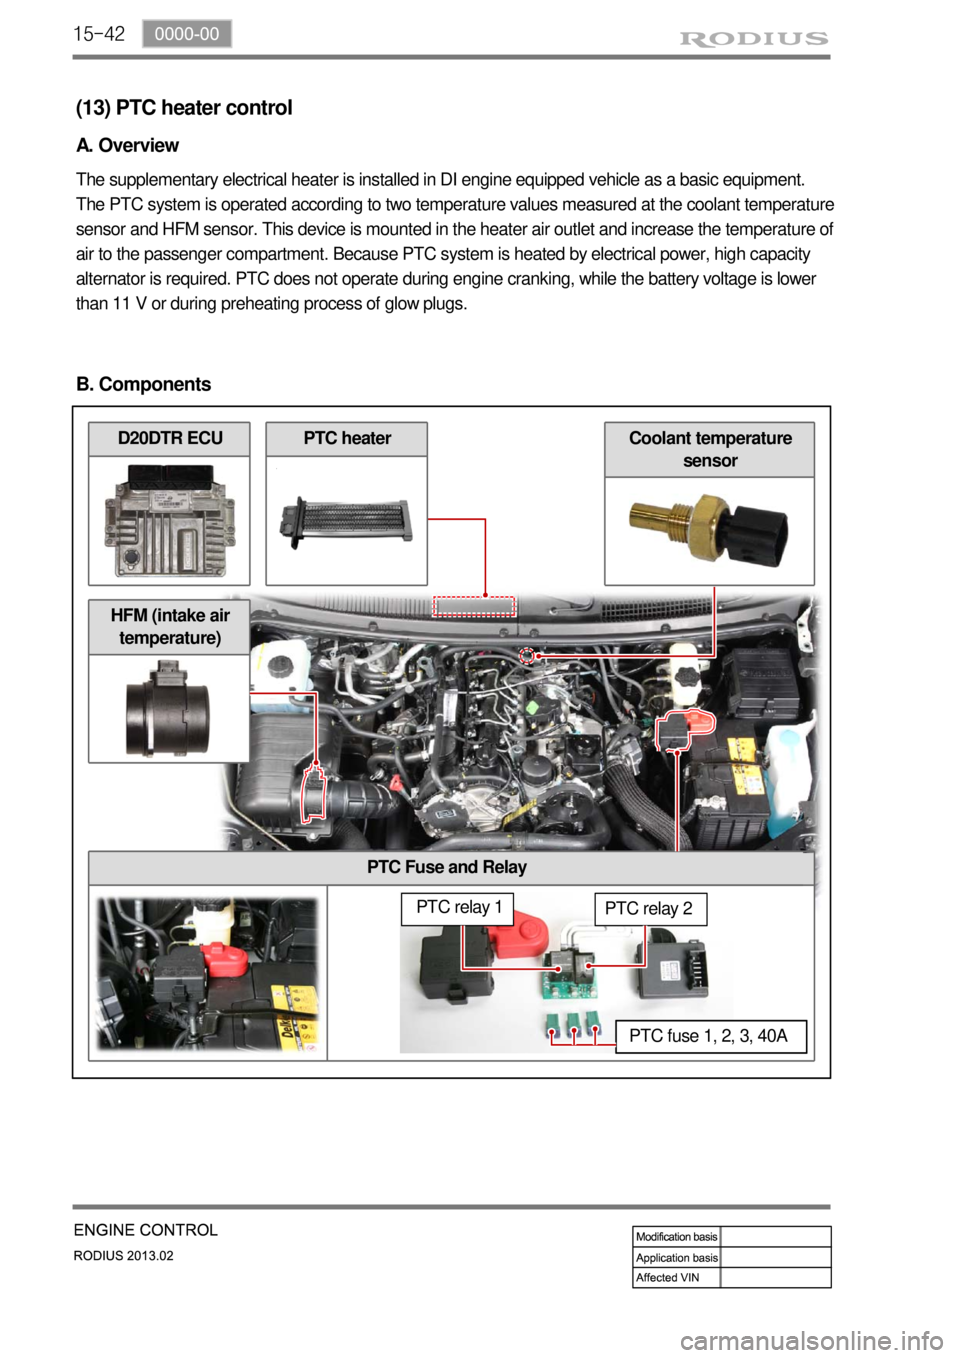 SSANGYONG TURISMO 2013  Service Manual 15-42
PTC Fuse and Relay
(13) PTC heater control
A. Overview
The supplementary electrical heater is installed in DI engine equipped vehicle as a basic equipment. 
The PTC system is operated according 